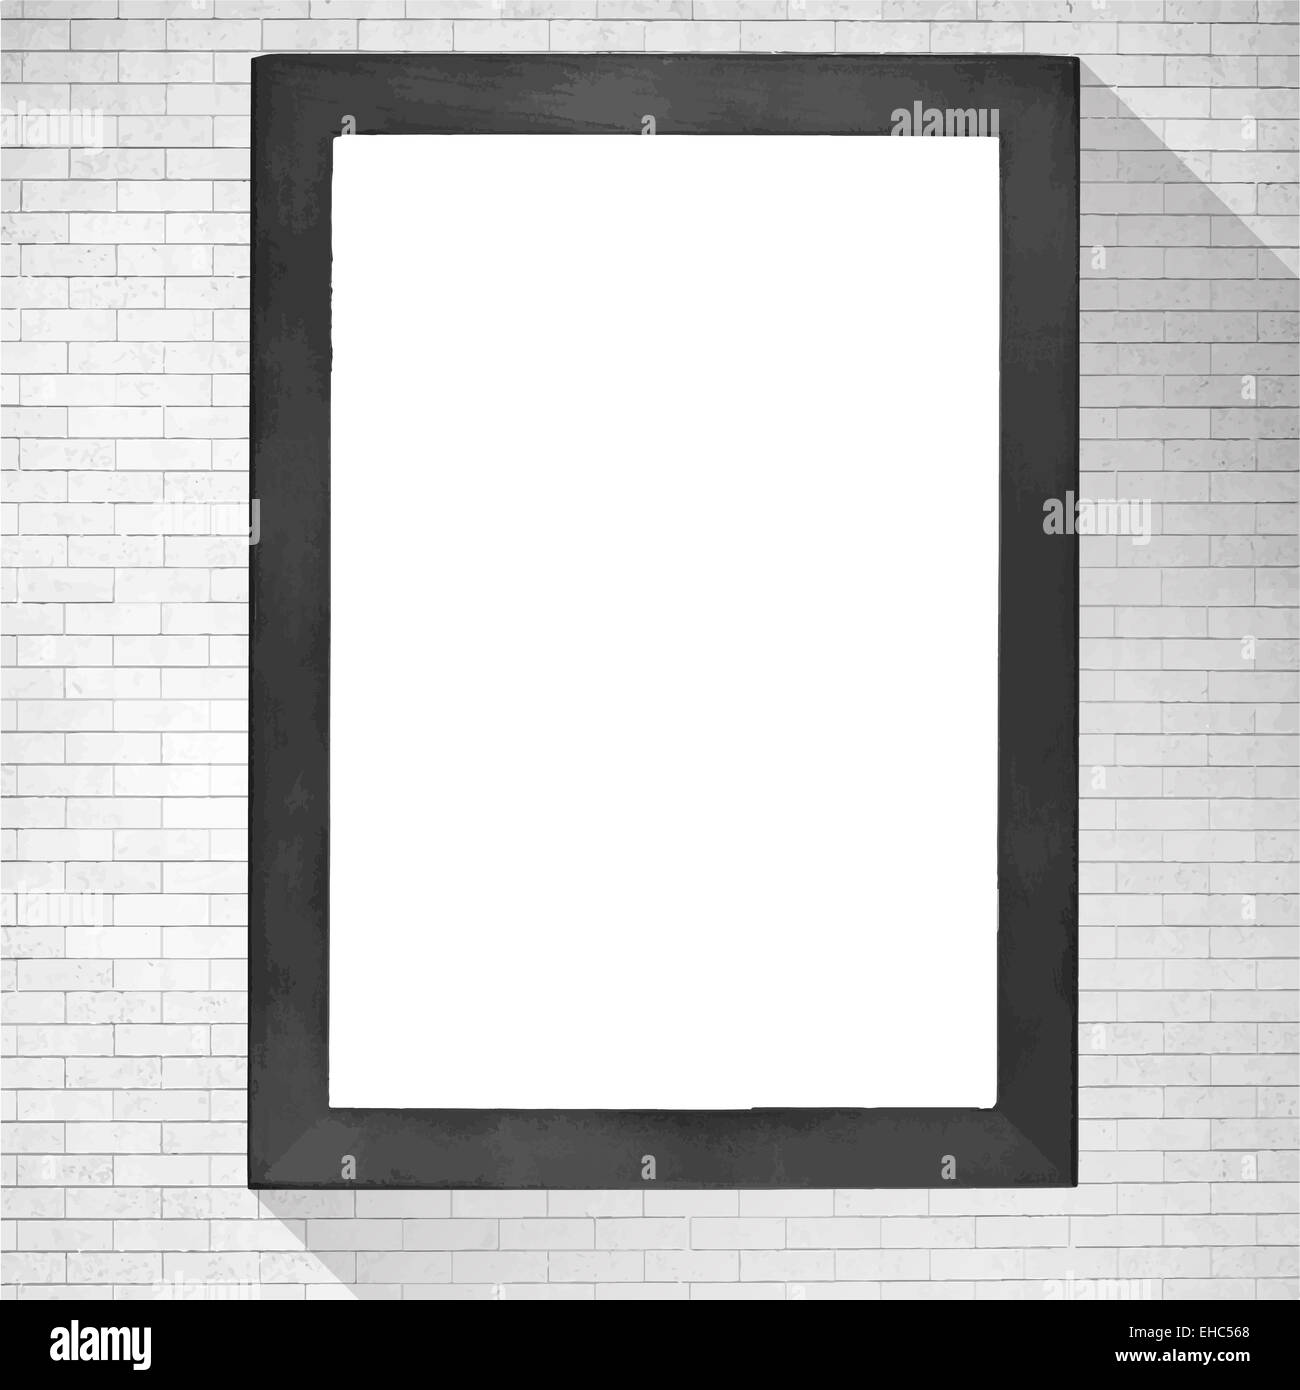 Black wooden frame with white copy space hanging on brick wall. Stock Photo